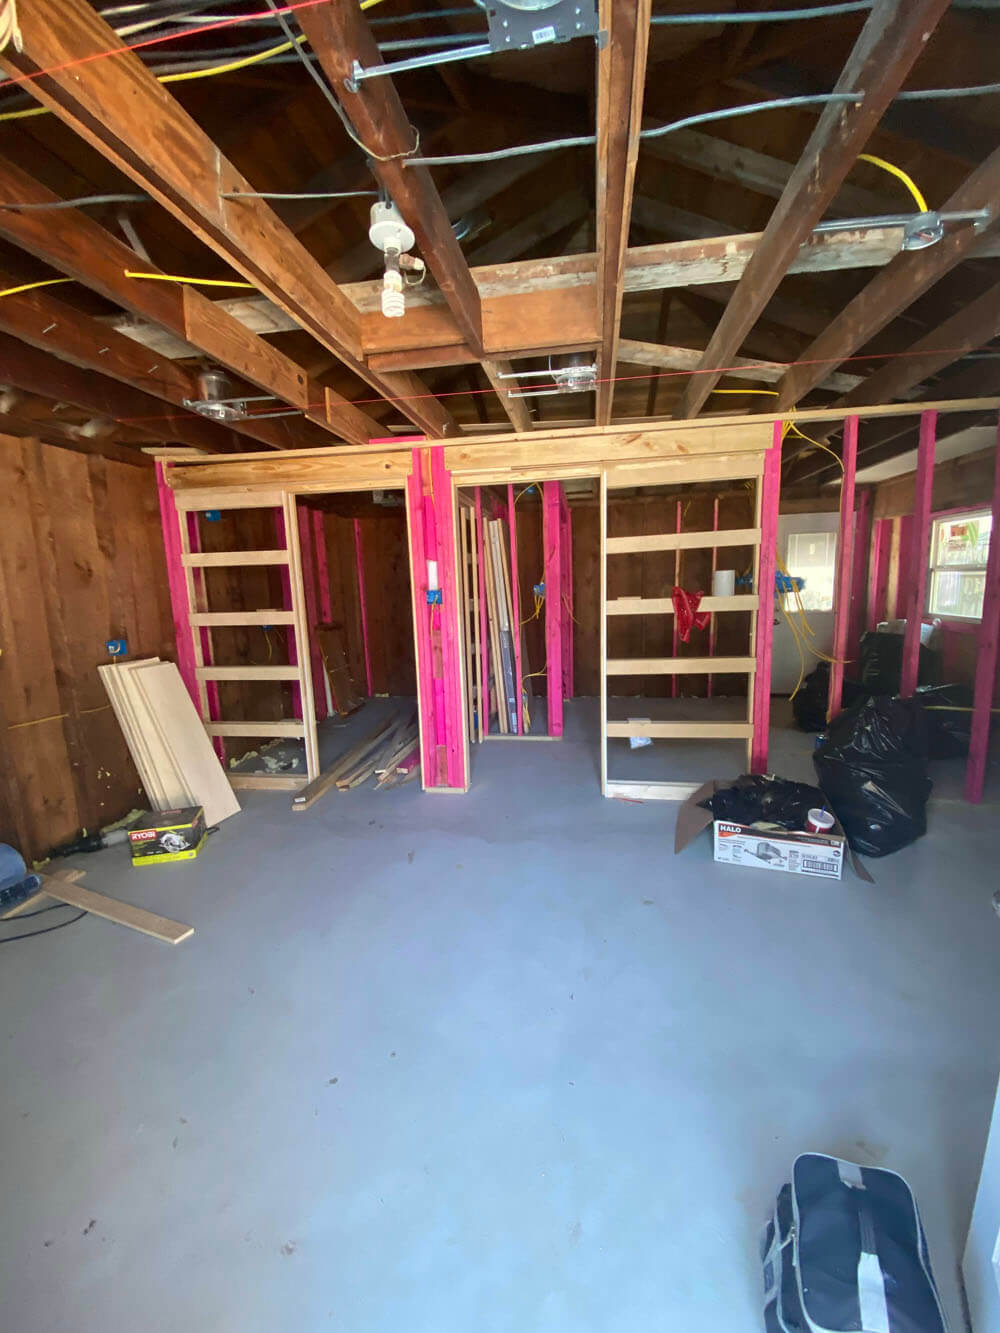 Home Addition And Expansion | Garage Conversion | Mother in law suite | Mr Drywall Repair and Remodeling